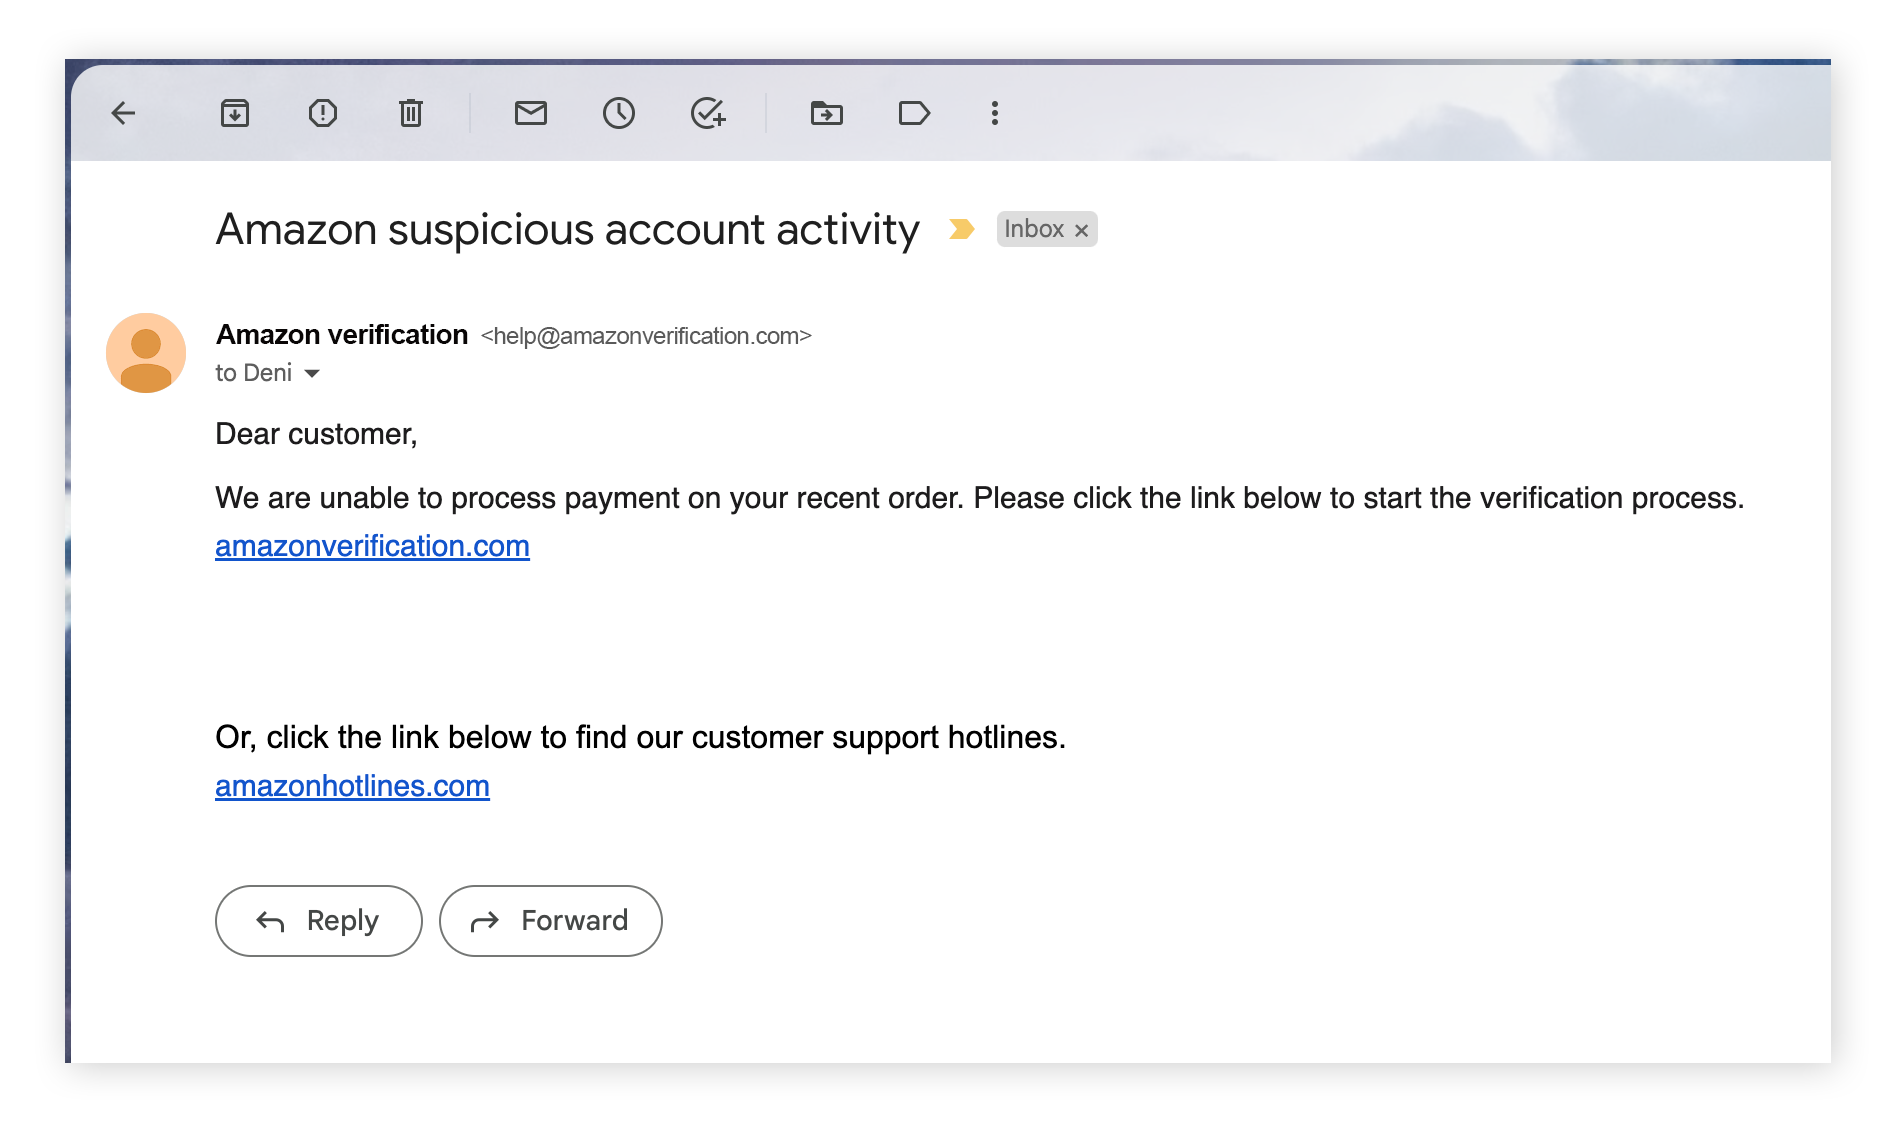 Some Amazon scams hook a victim by stating there's a problem with payment or account access.